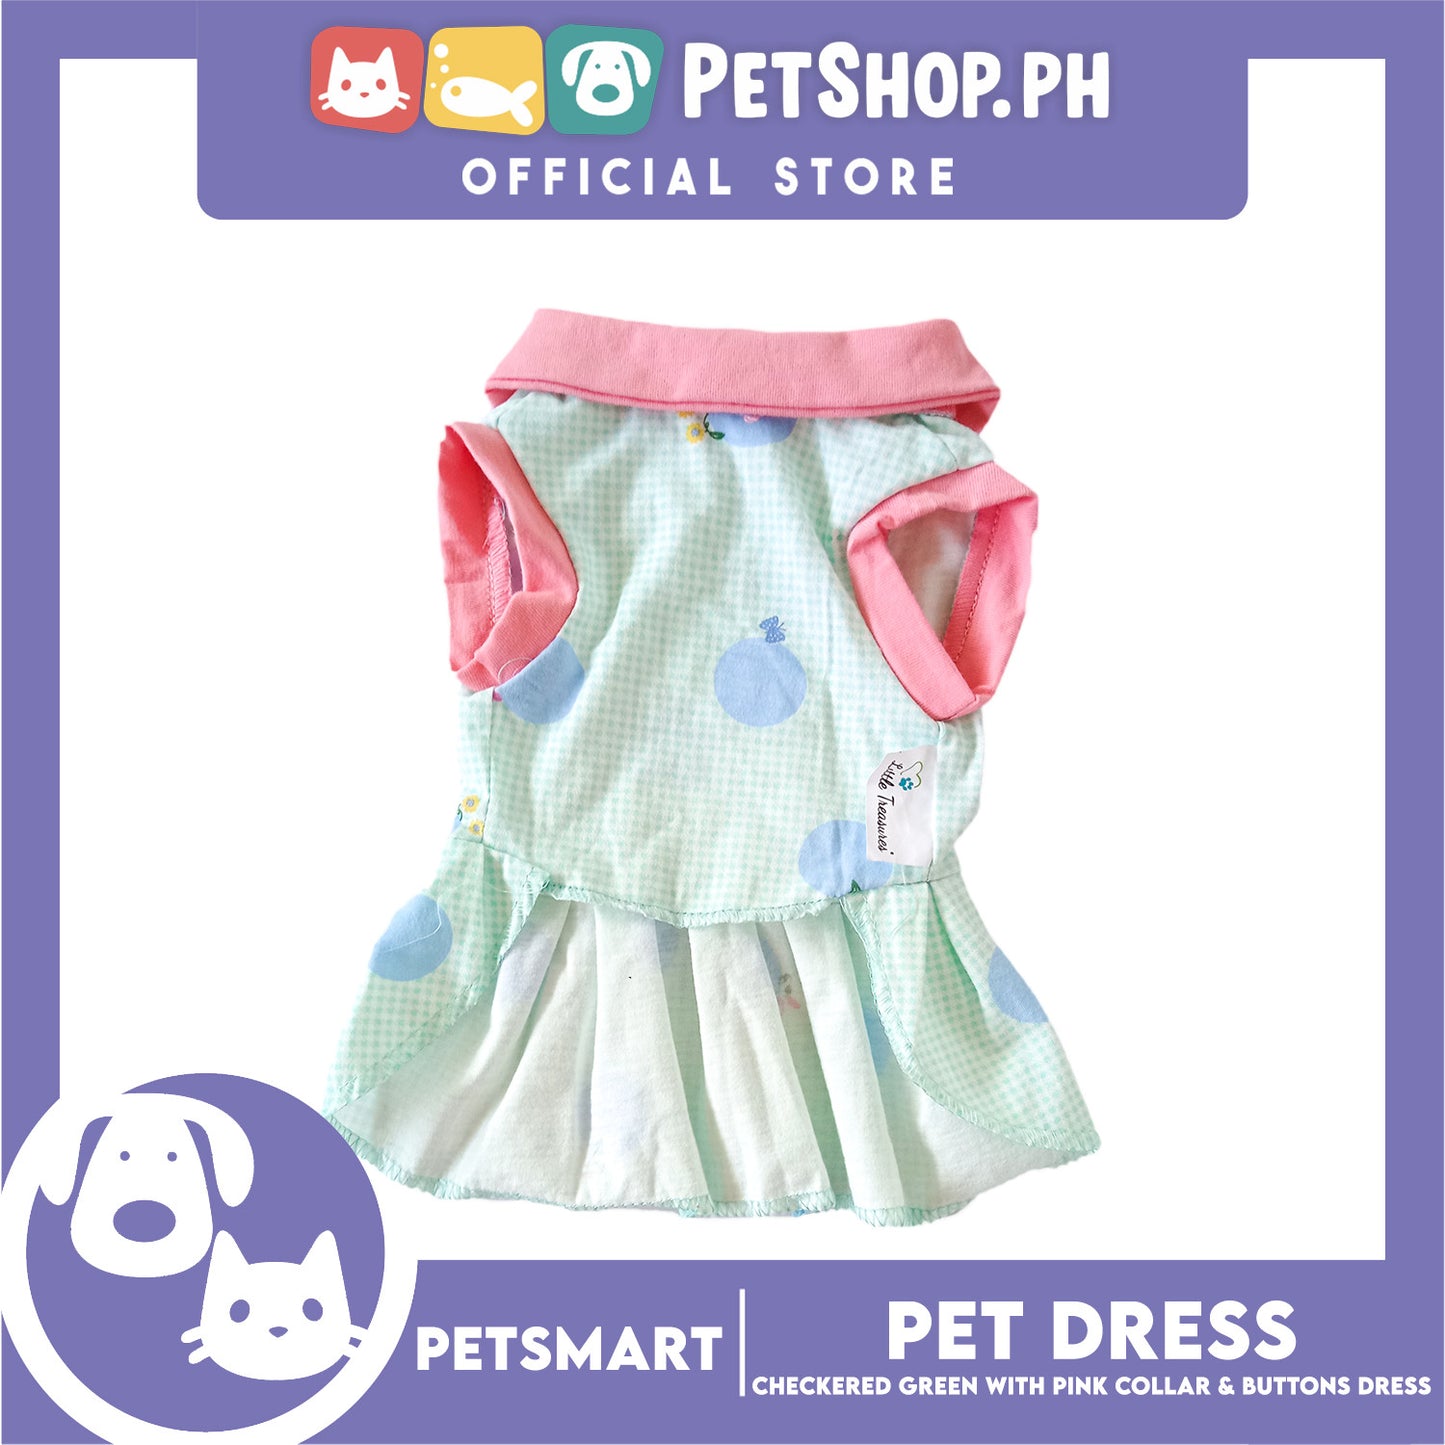 Pet Dress Checkered Design, Green with Pink Collar and Button Dress (Large) Perfect Fit for Dogs and Cats